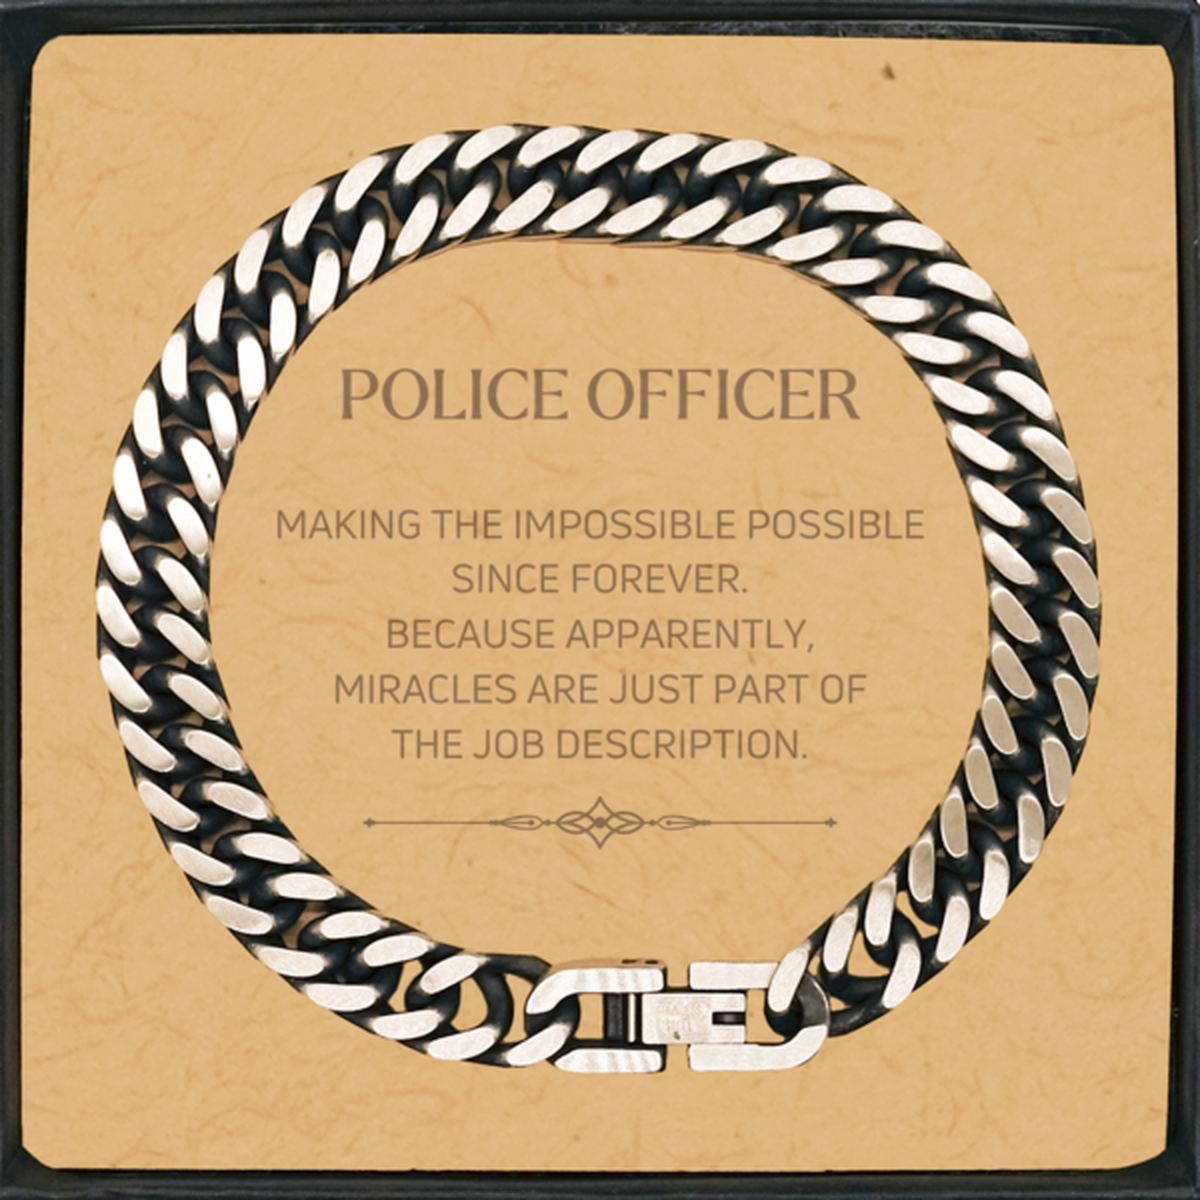 Funny Police Officer Gifts, Miracles are just part of the job description, Inspirational Birthday Cuban Link Chain Bracelet For Police Officer, Men, Women, Coworkers, Friends, Boss